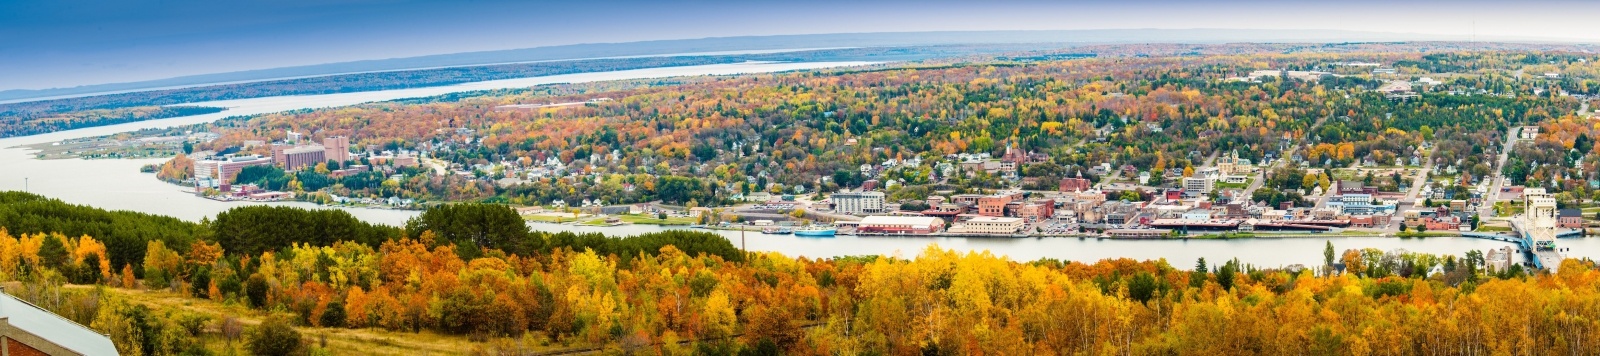 Aerial view of Michigan Tech campus and the surrounding community.